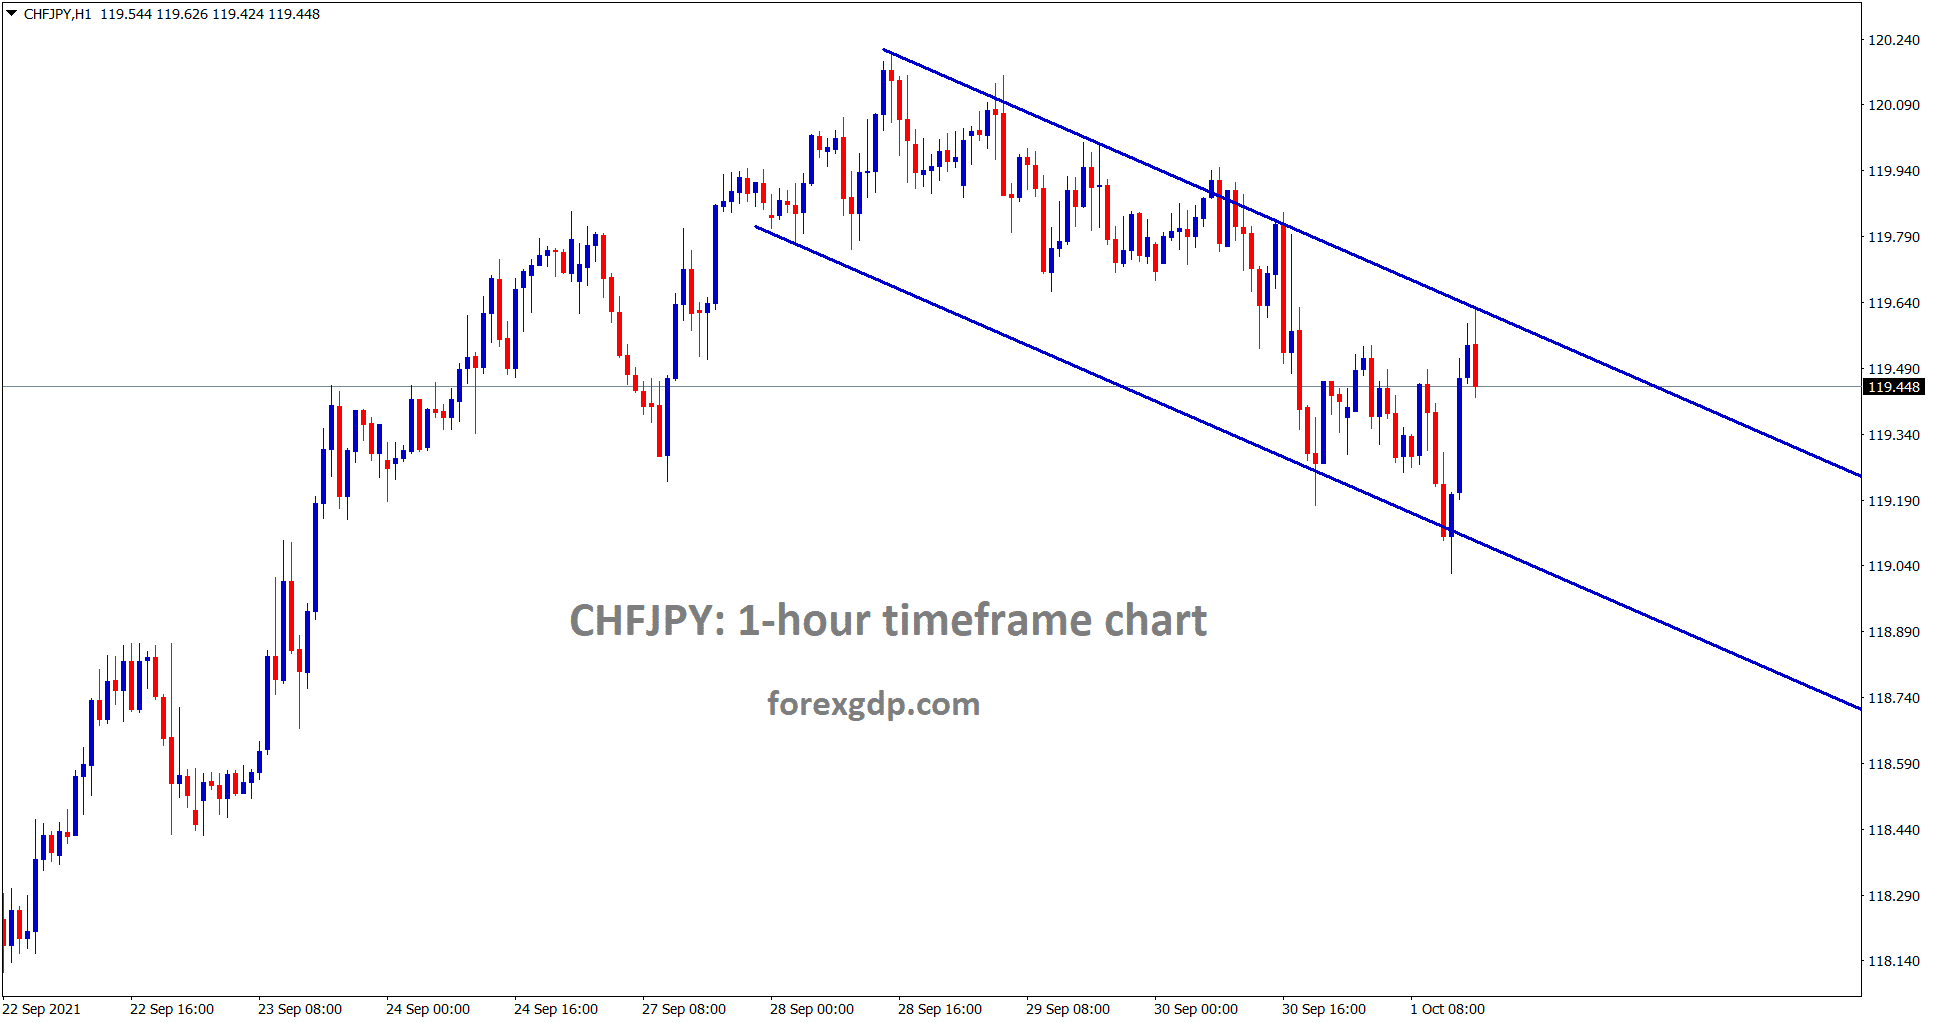 CHFJPY is moving in a minor descending channel in the 1 hour timeframe